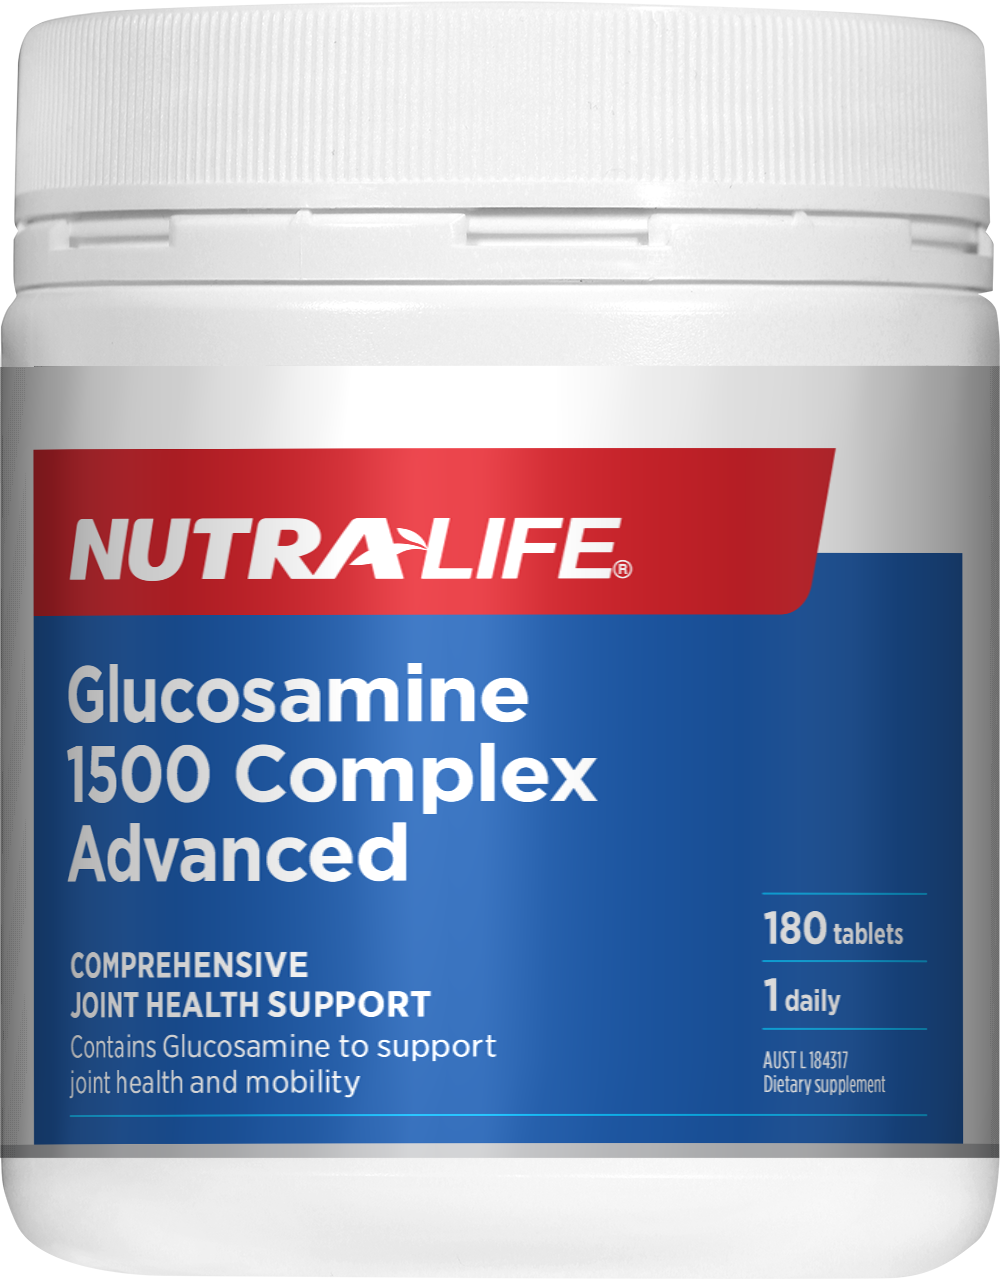 Nutralife Glucosamine 1500 Complex Advanced 180 tablets